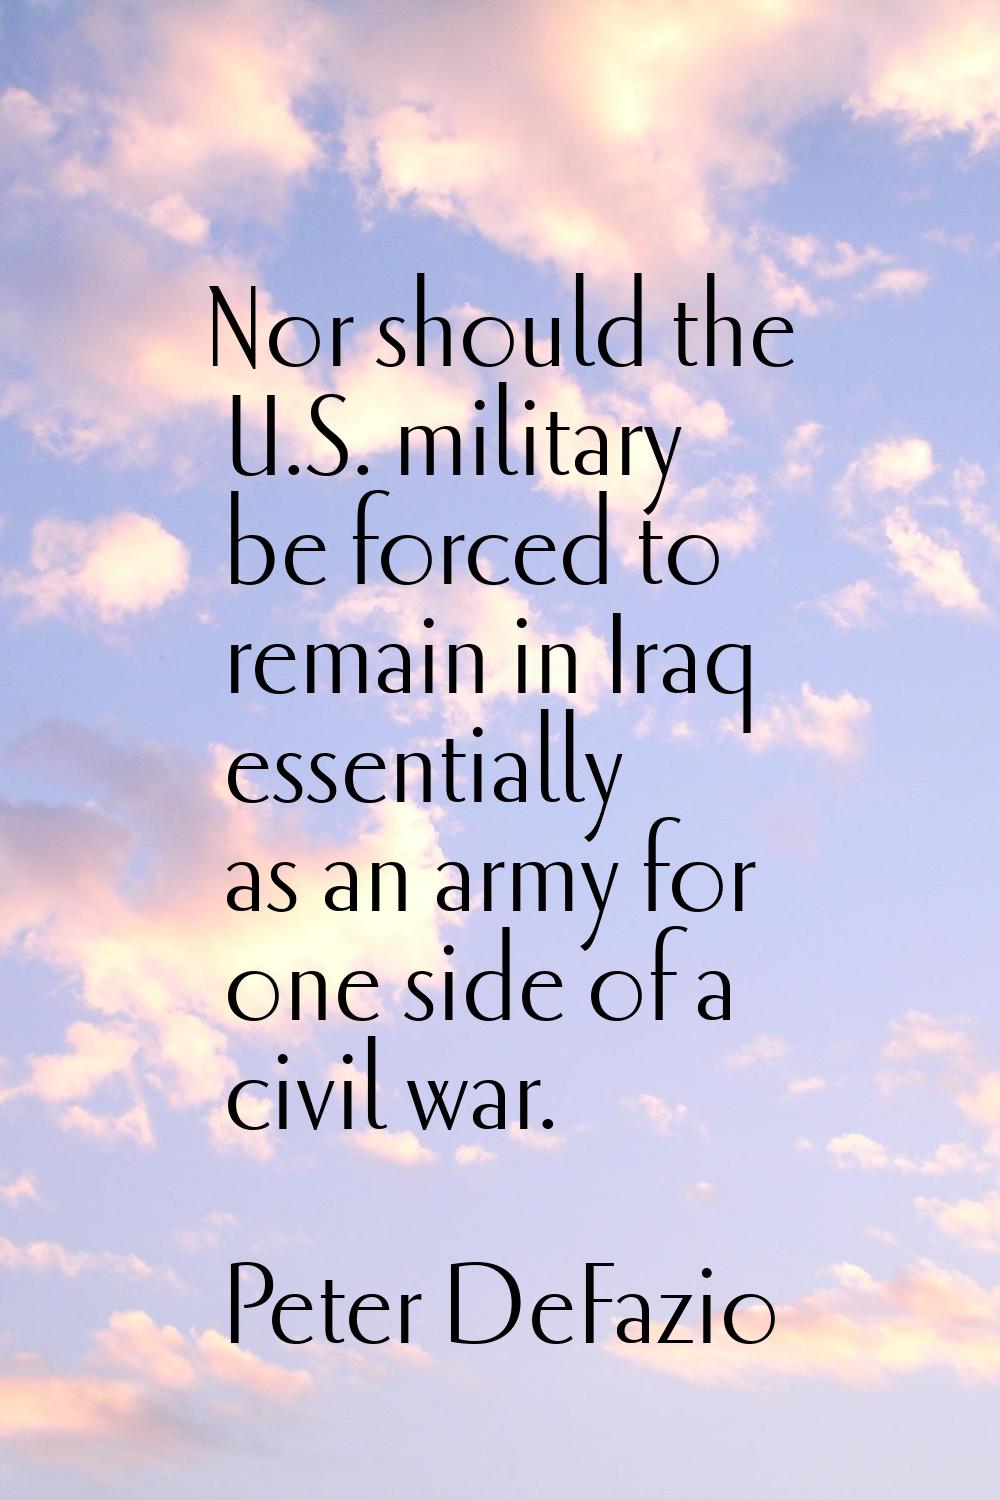 Nor should the U.S. military be forced to remain in Iraq essentially as an army for one side of a c